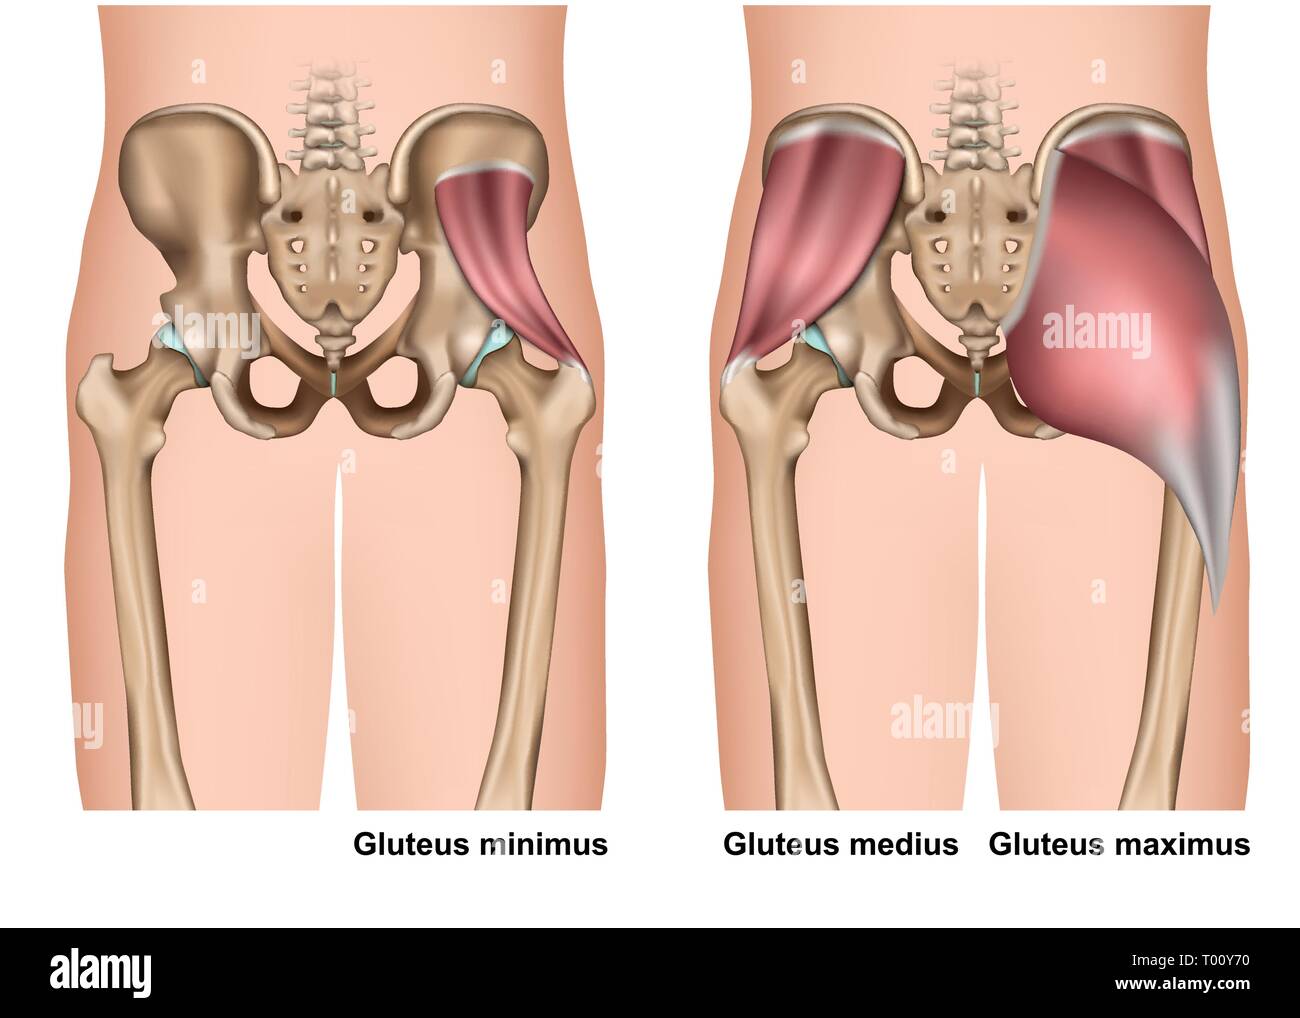 gluteus muscle anatomy 3d medical vector illustration on white background Stock Vector